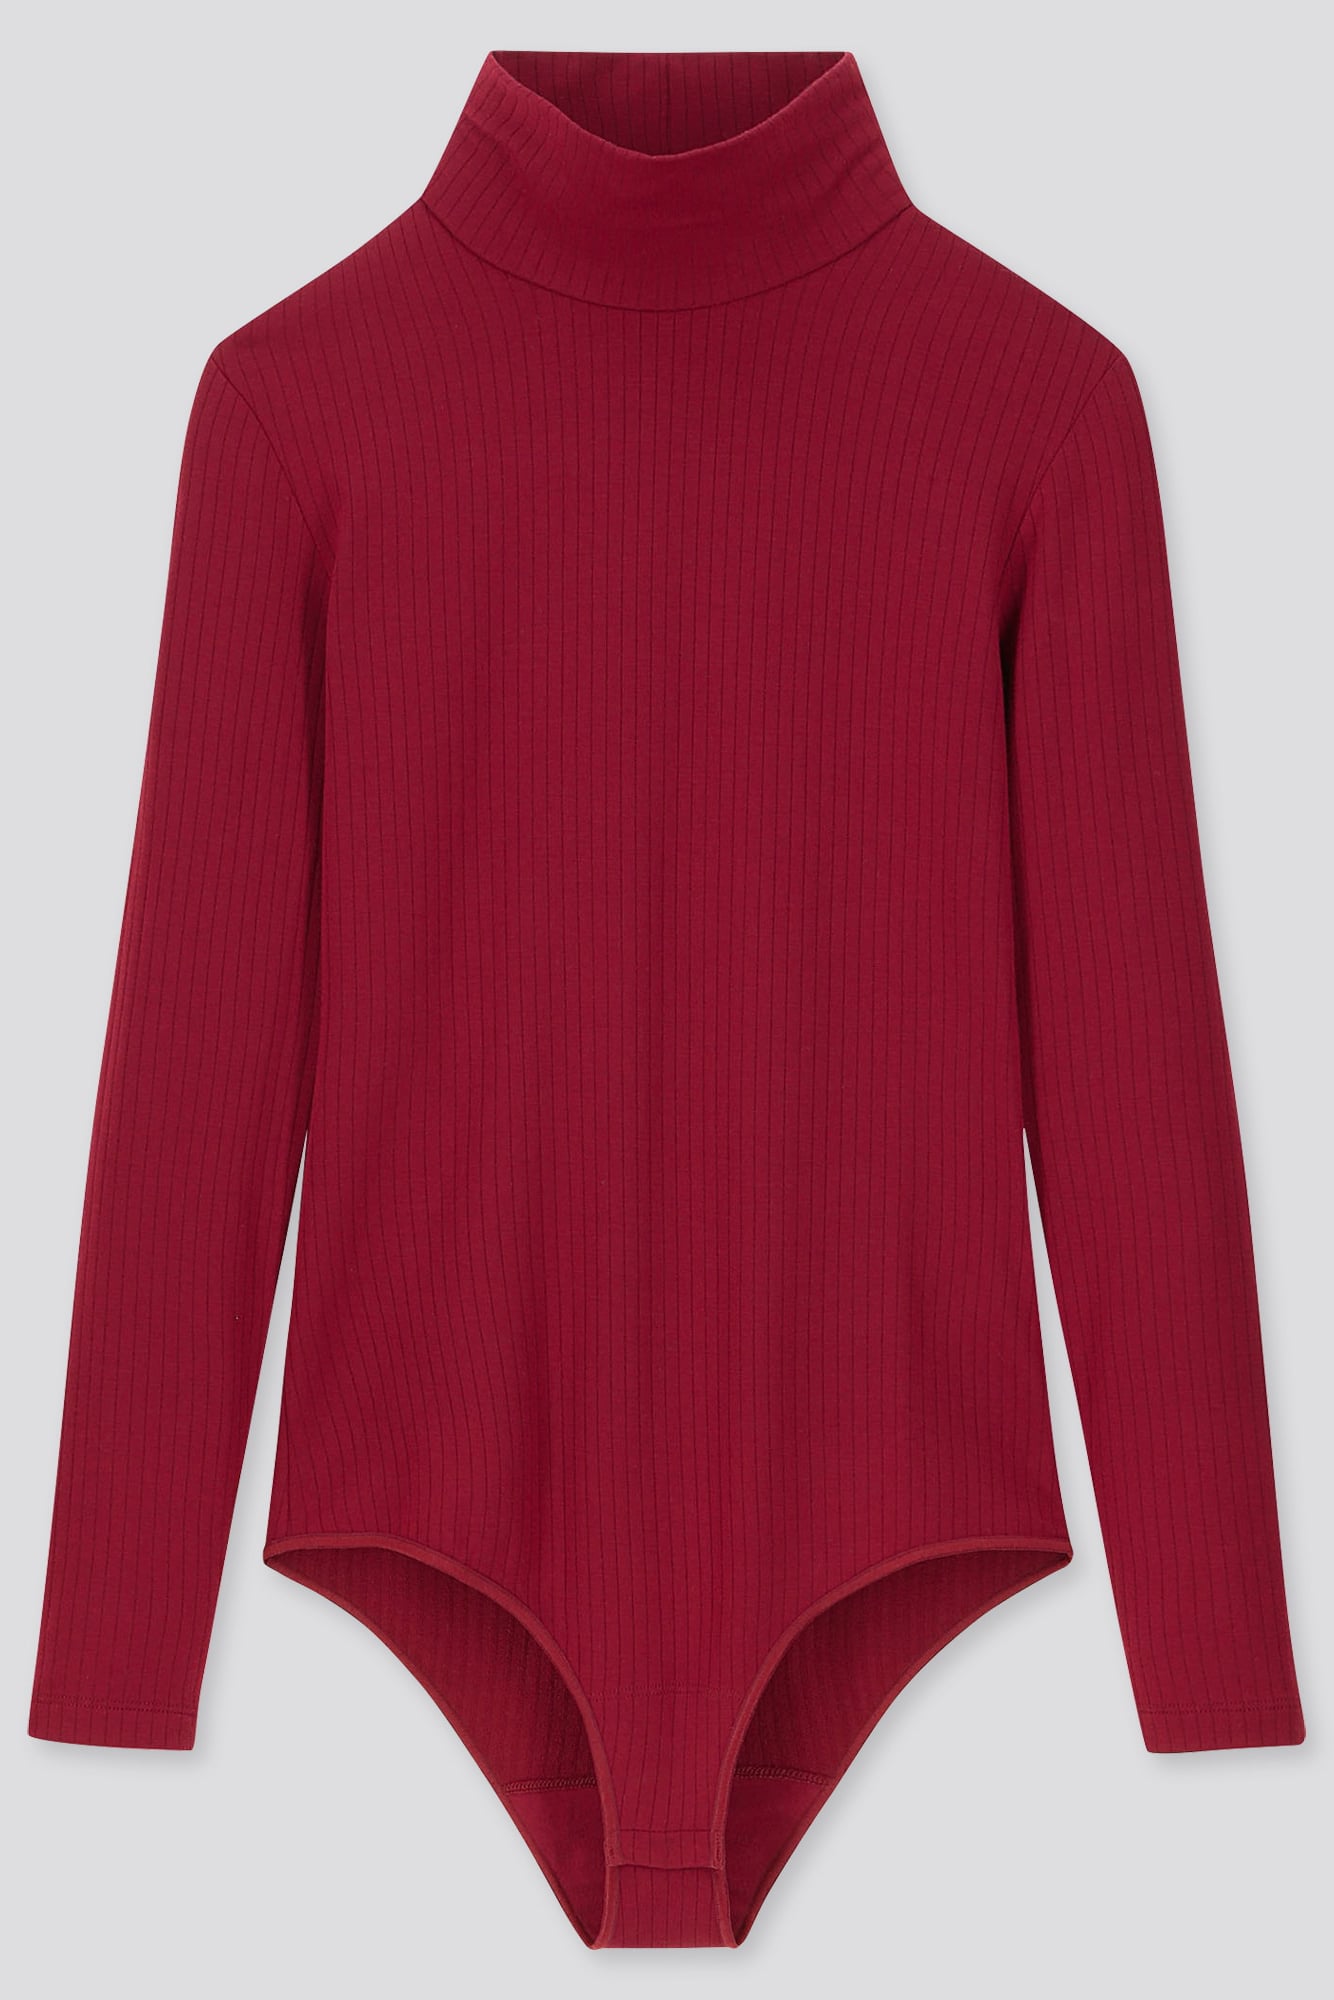 Uniqlo Heattech Extra Warm Ribbed Bodysuit, The Cold-Weather Layering  Secret 1 Fashion Editor Swears By